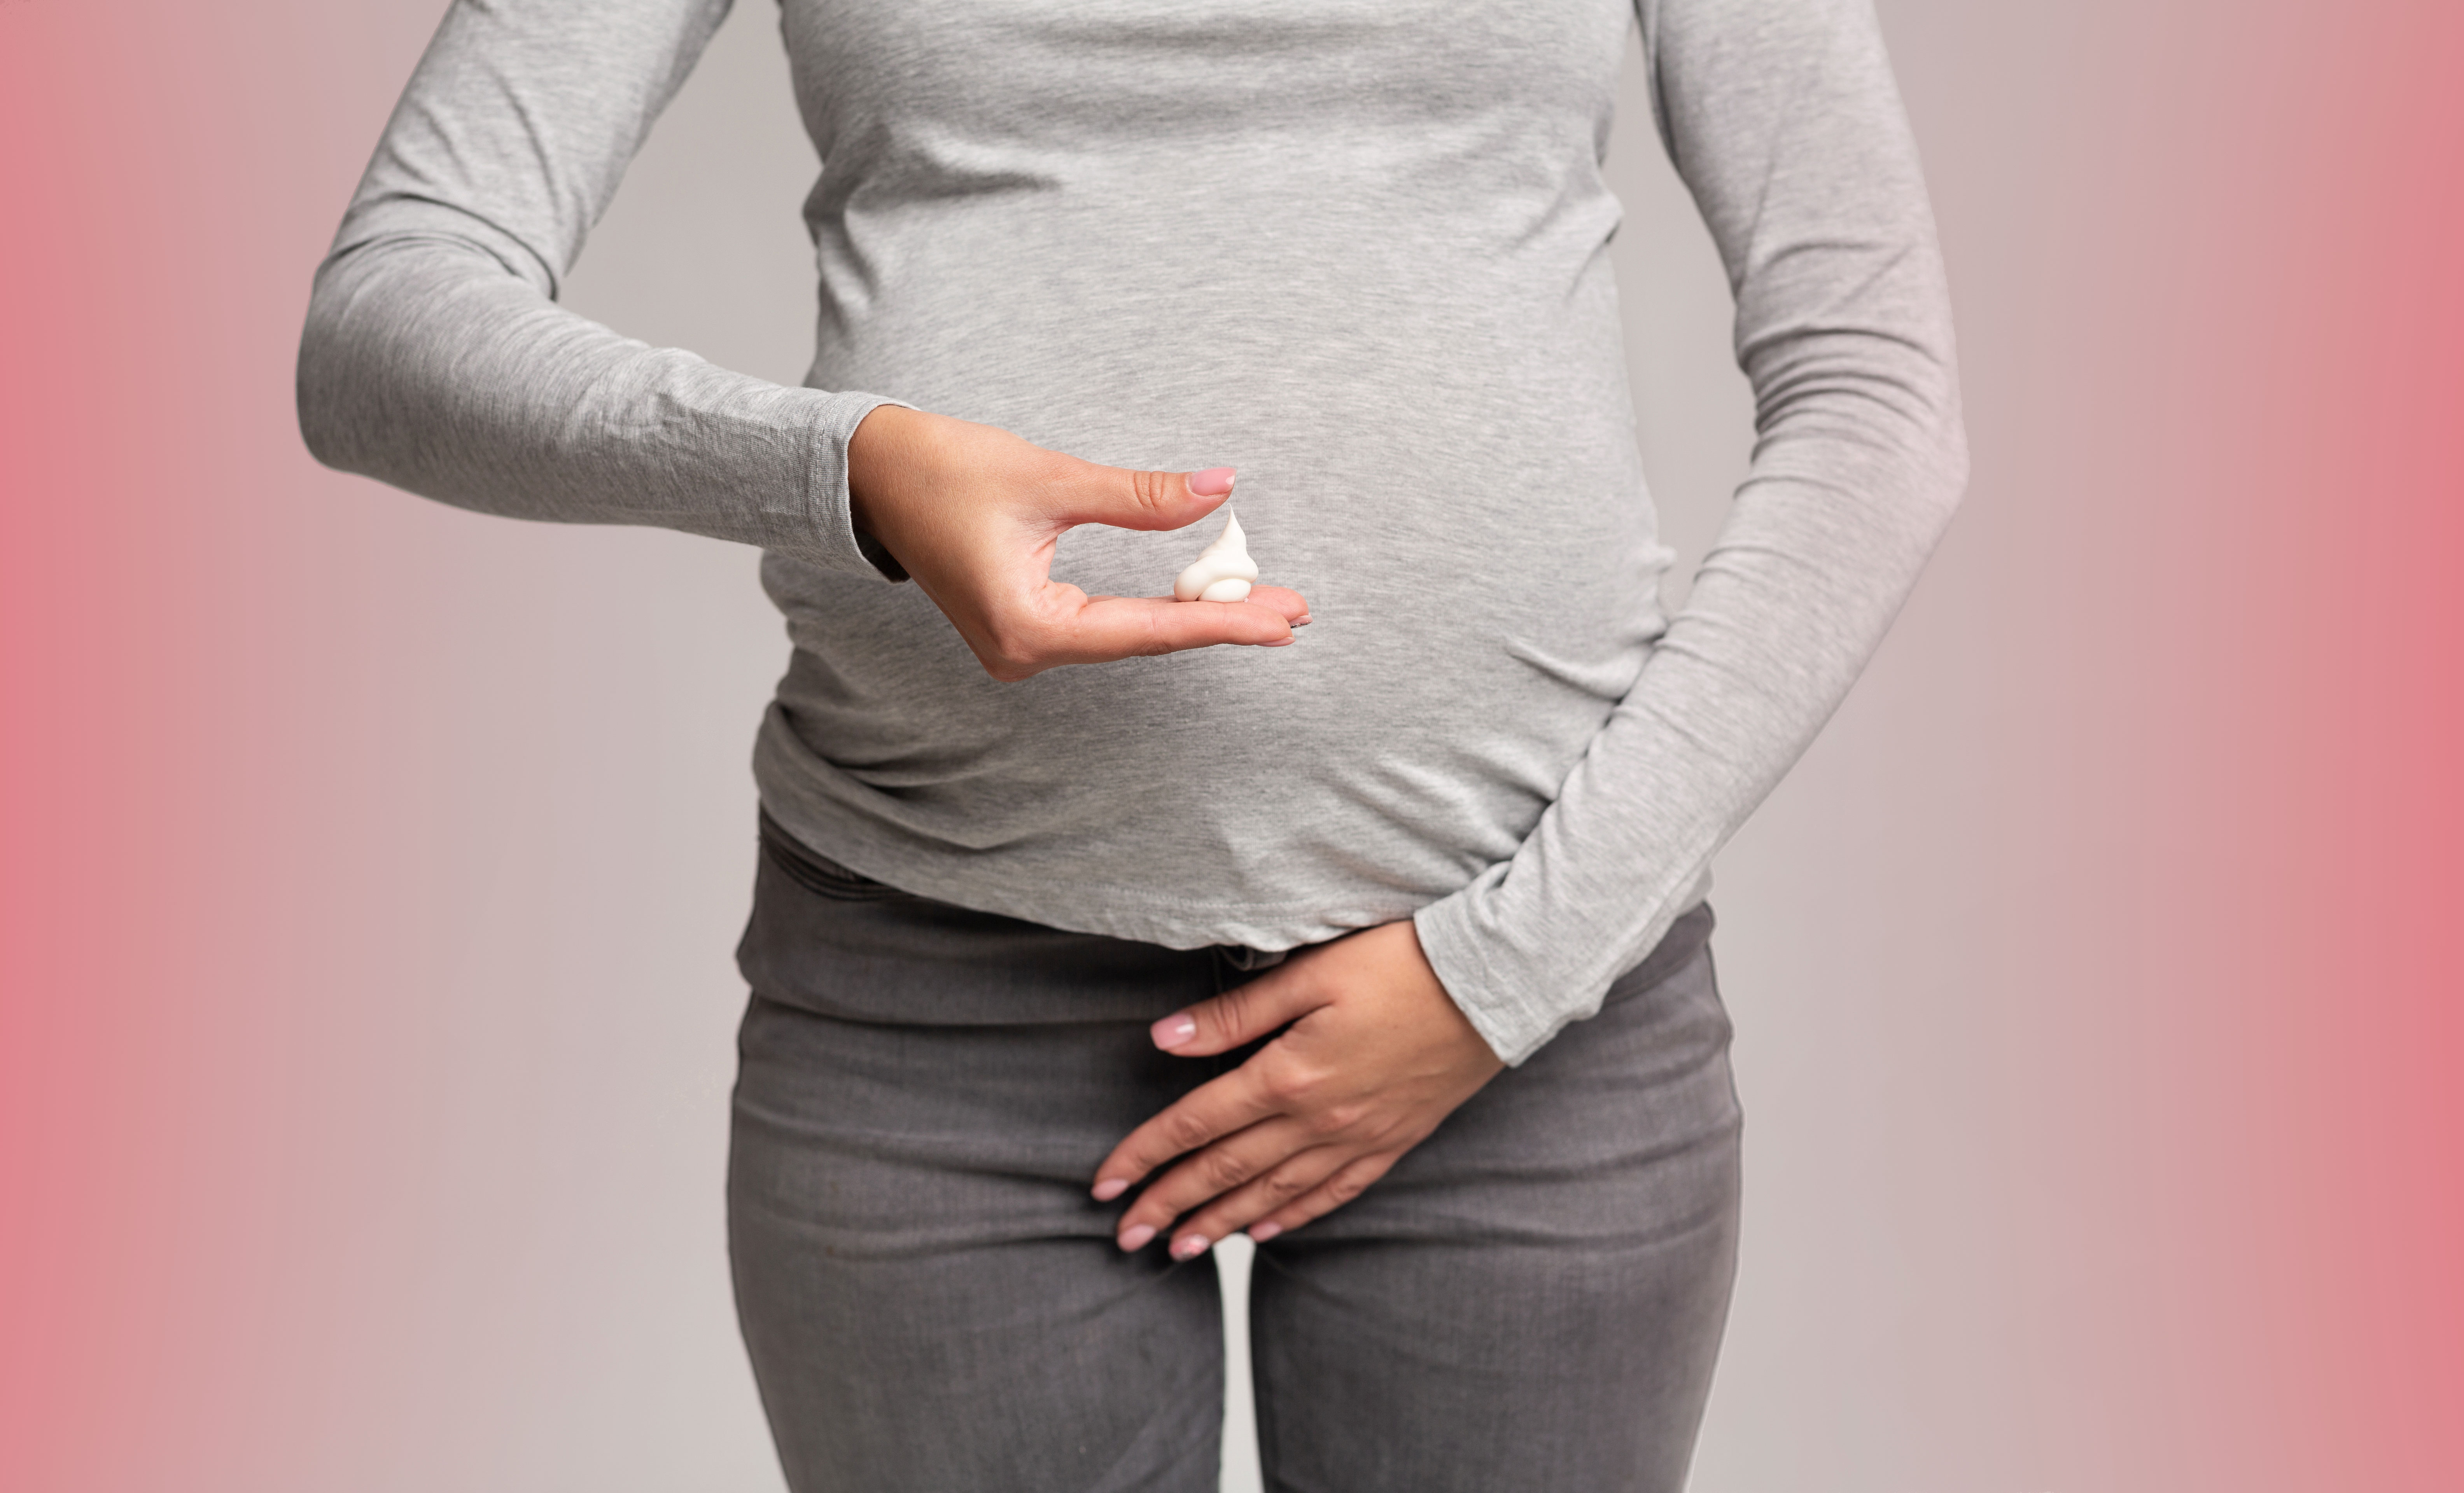 How To Treat Yeast Infection During Pregnancy (You Can Pass It To Your Newborn)